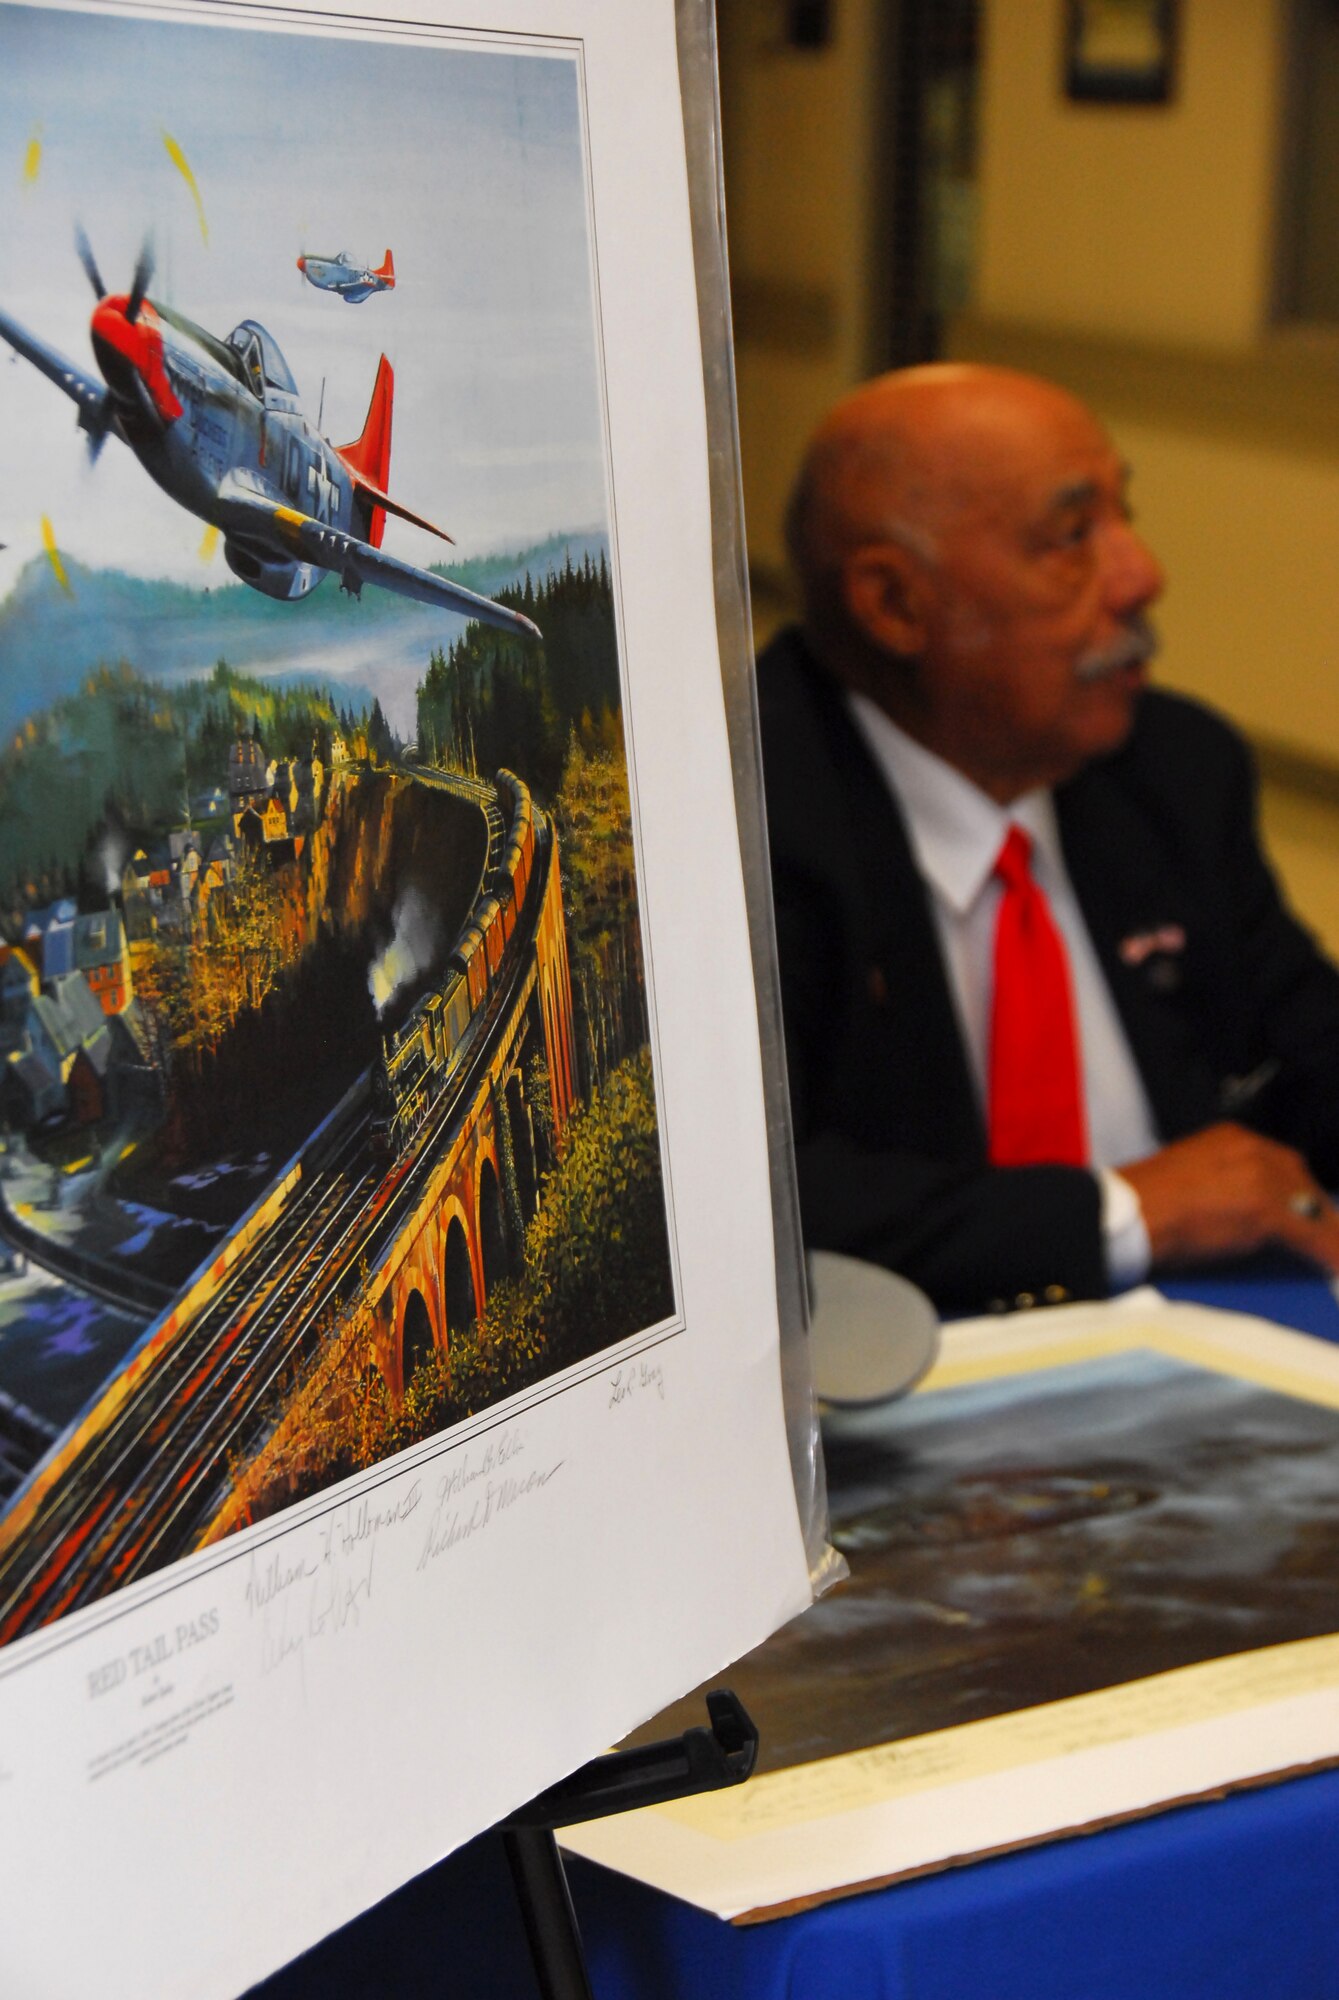 Retired Lt. Col. William Holloman, one of the original Tuskegee Airmen, signs autographs near a lithograph depicting the Tuskegee Airmen in combat during World War II. (Air Force photo by Scoot Knuteson)